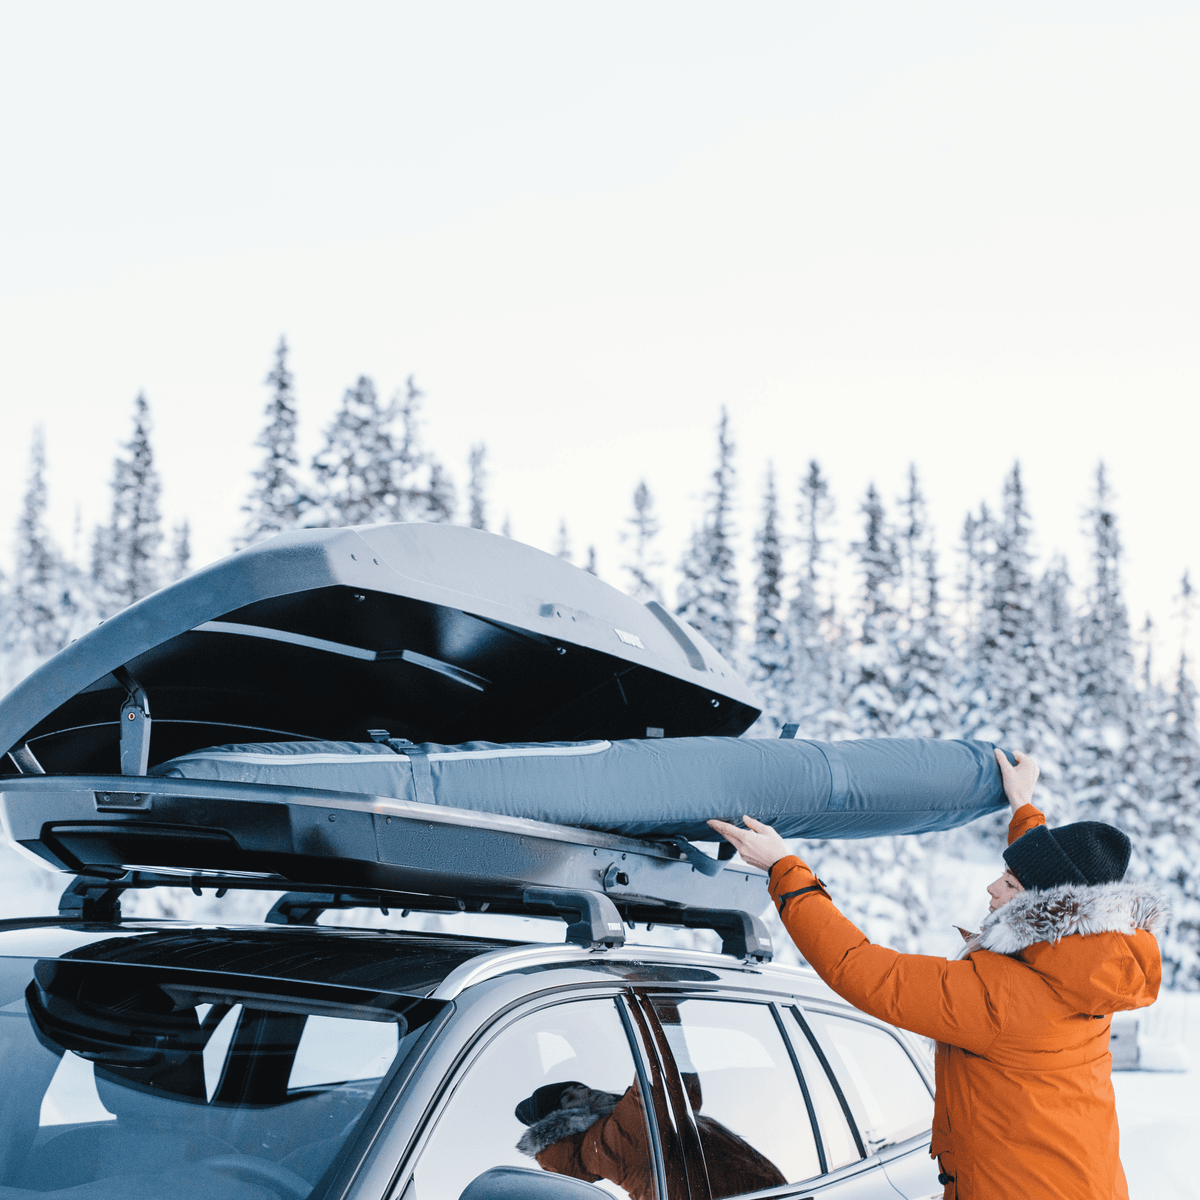 A person in the snow loads a Thule RoundTrip Ski Bag into the roof box of their car.